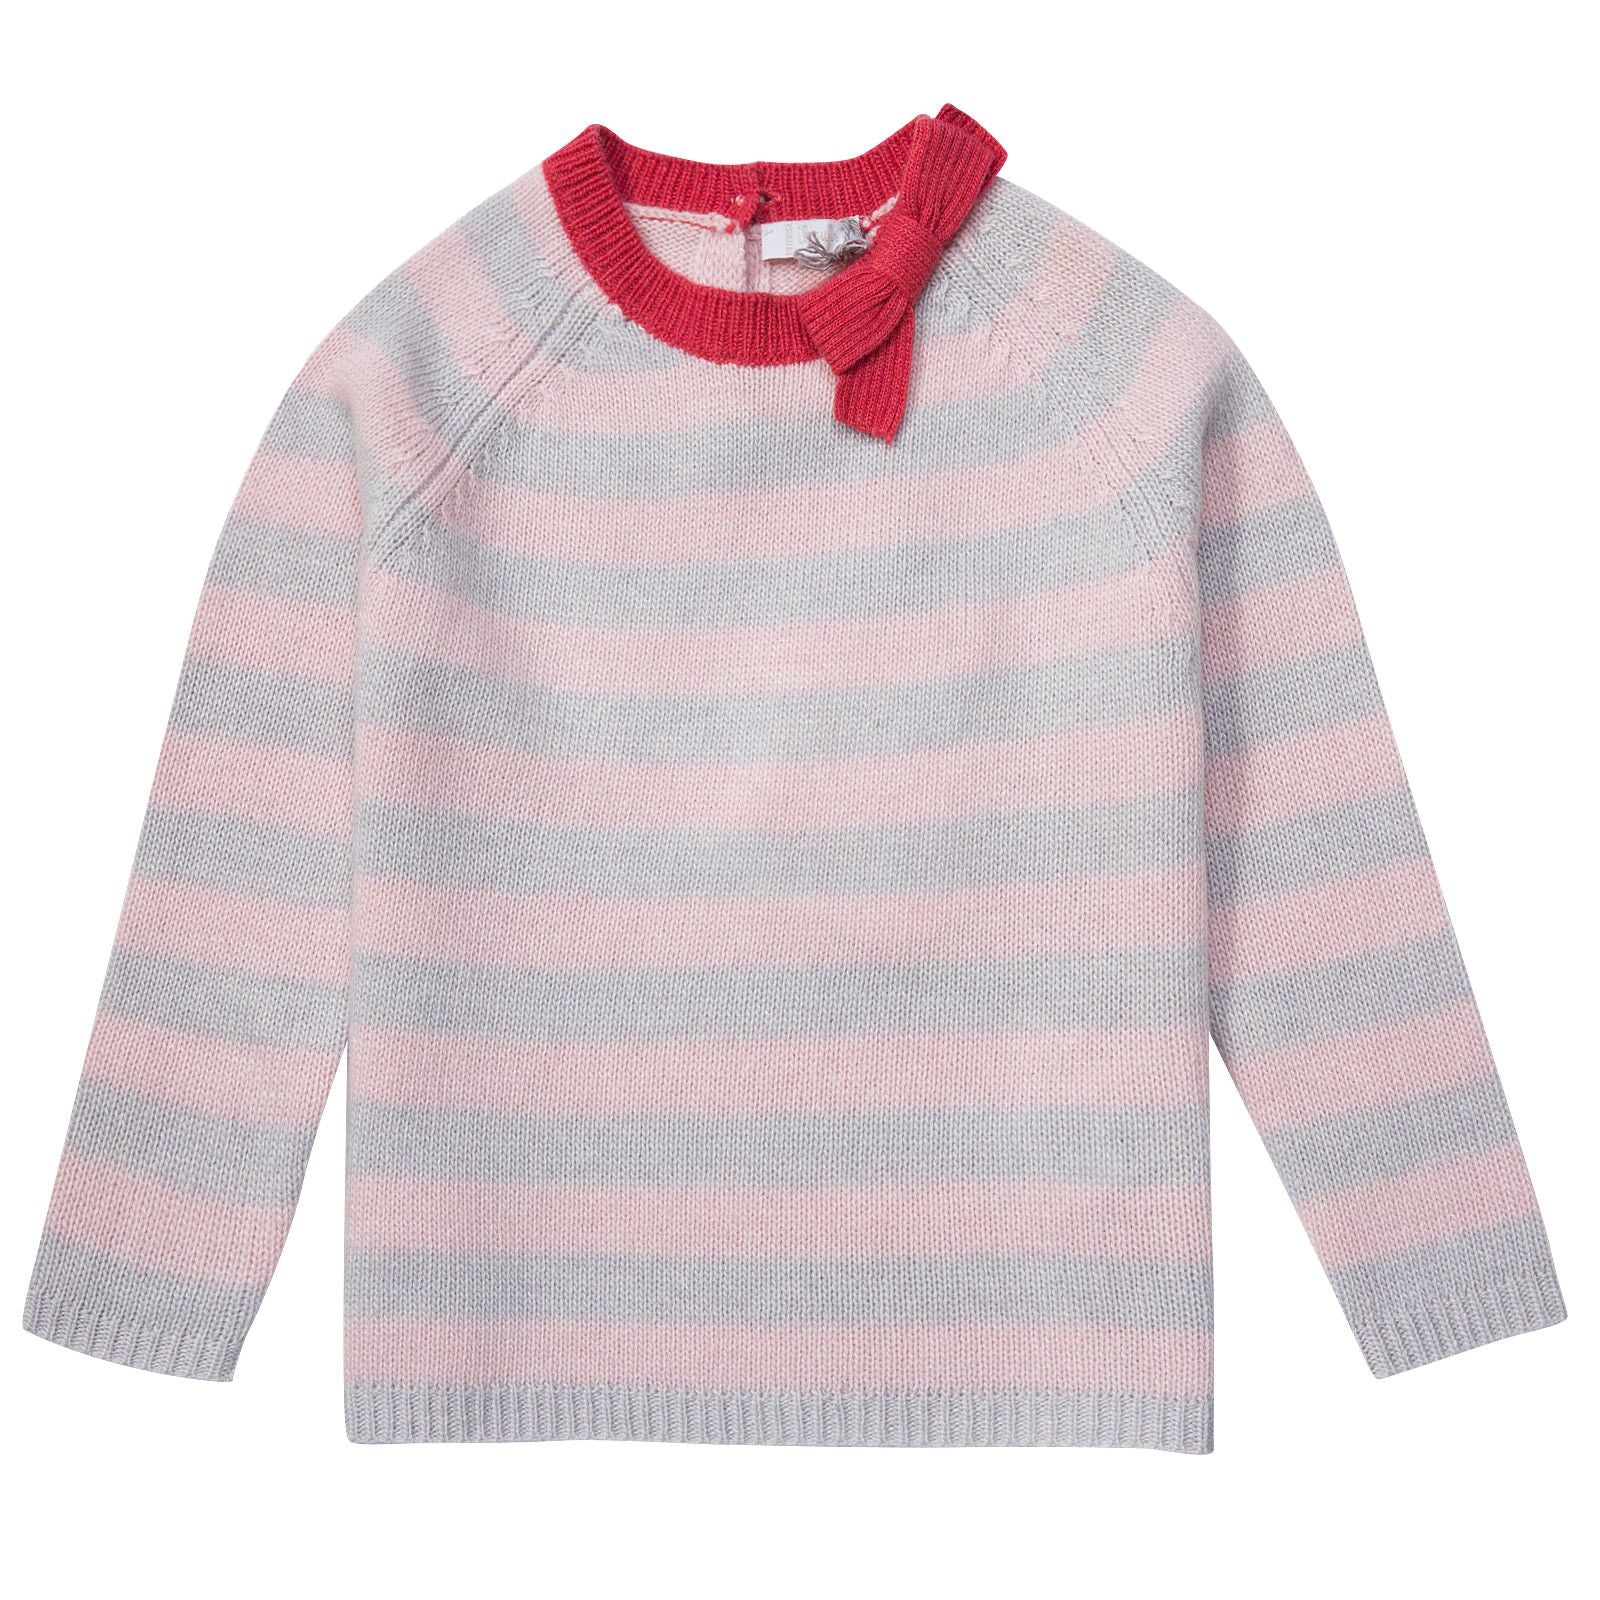 Baby Girls Grey&Pink Stripe Sweater With Red Bow - CÉMAROSE | Children's Fashion Store - 1